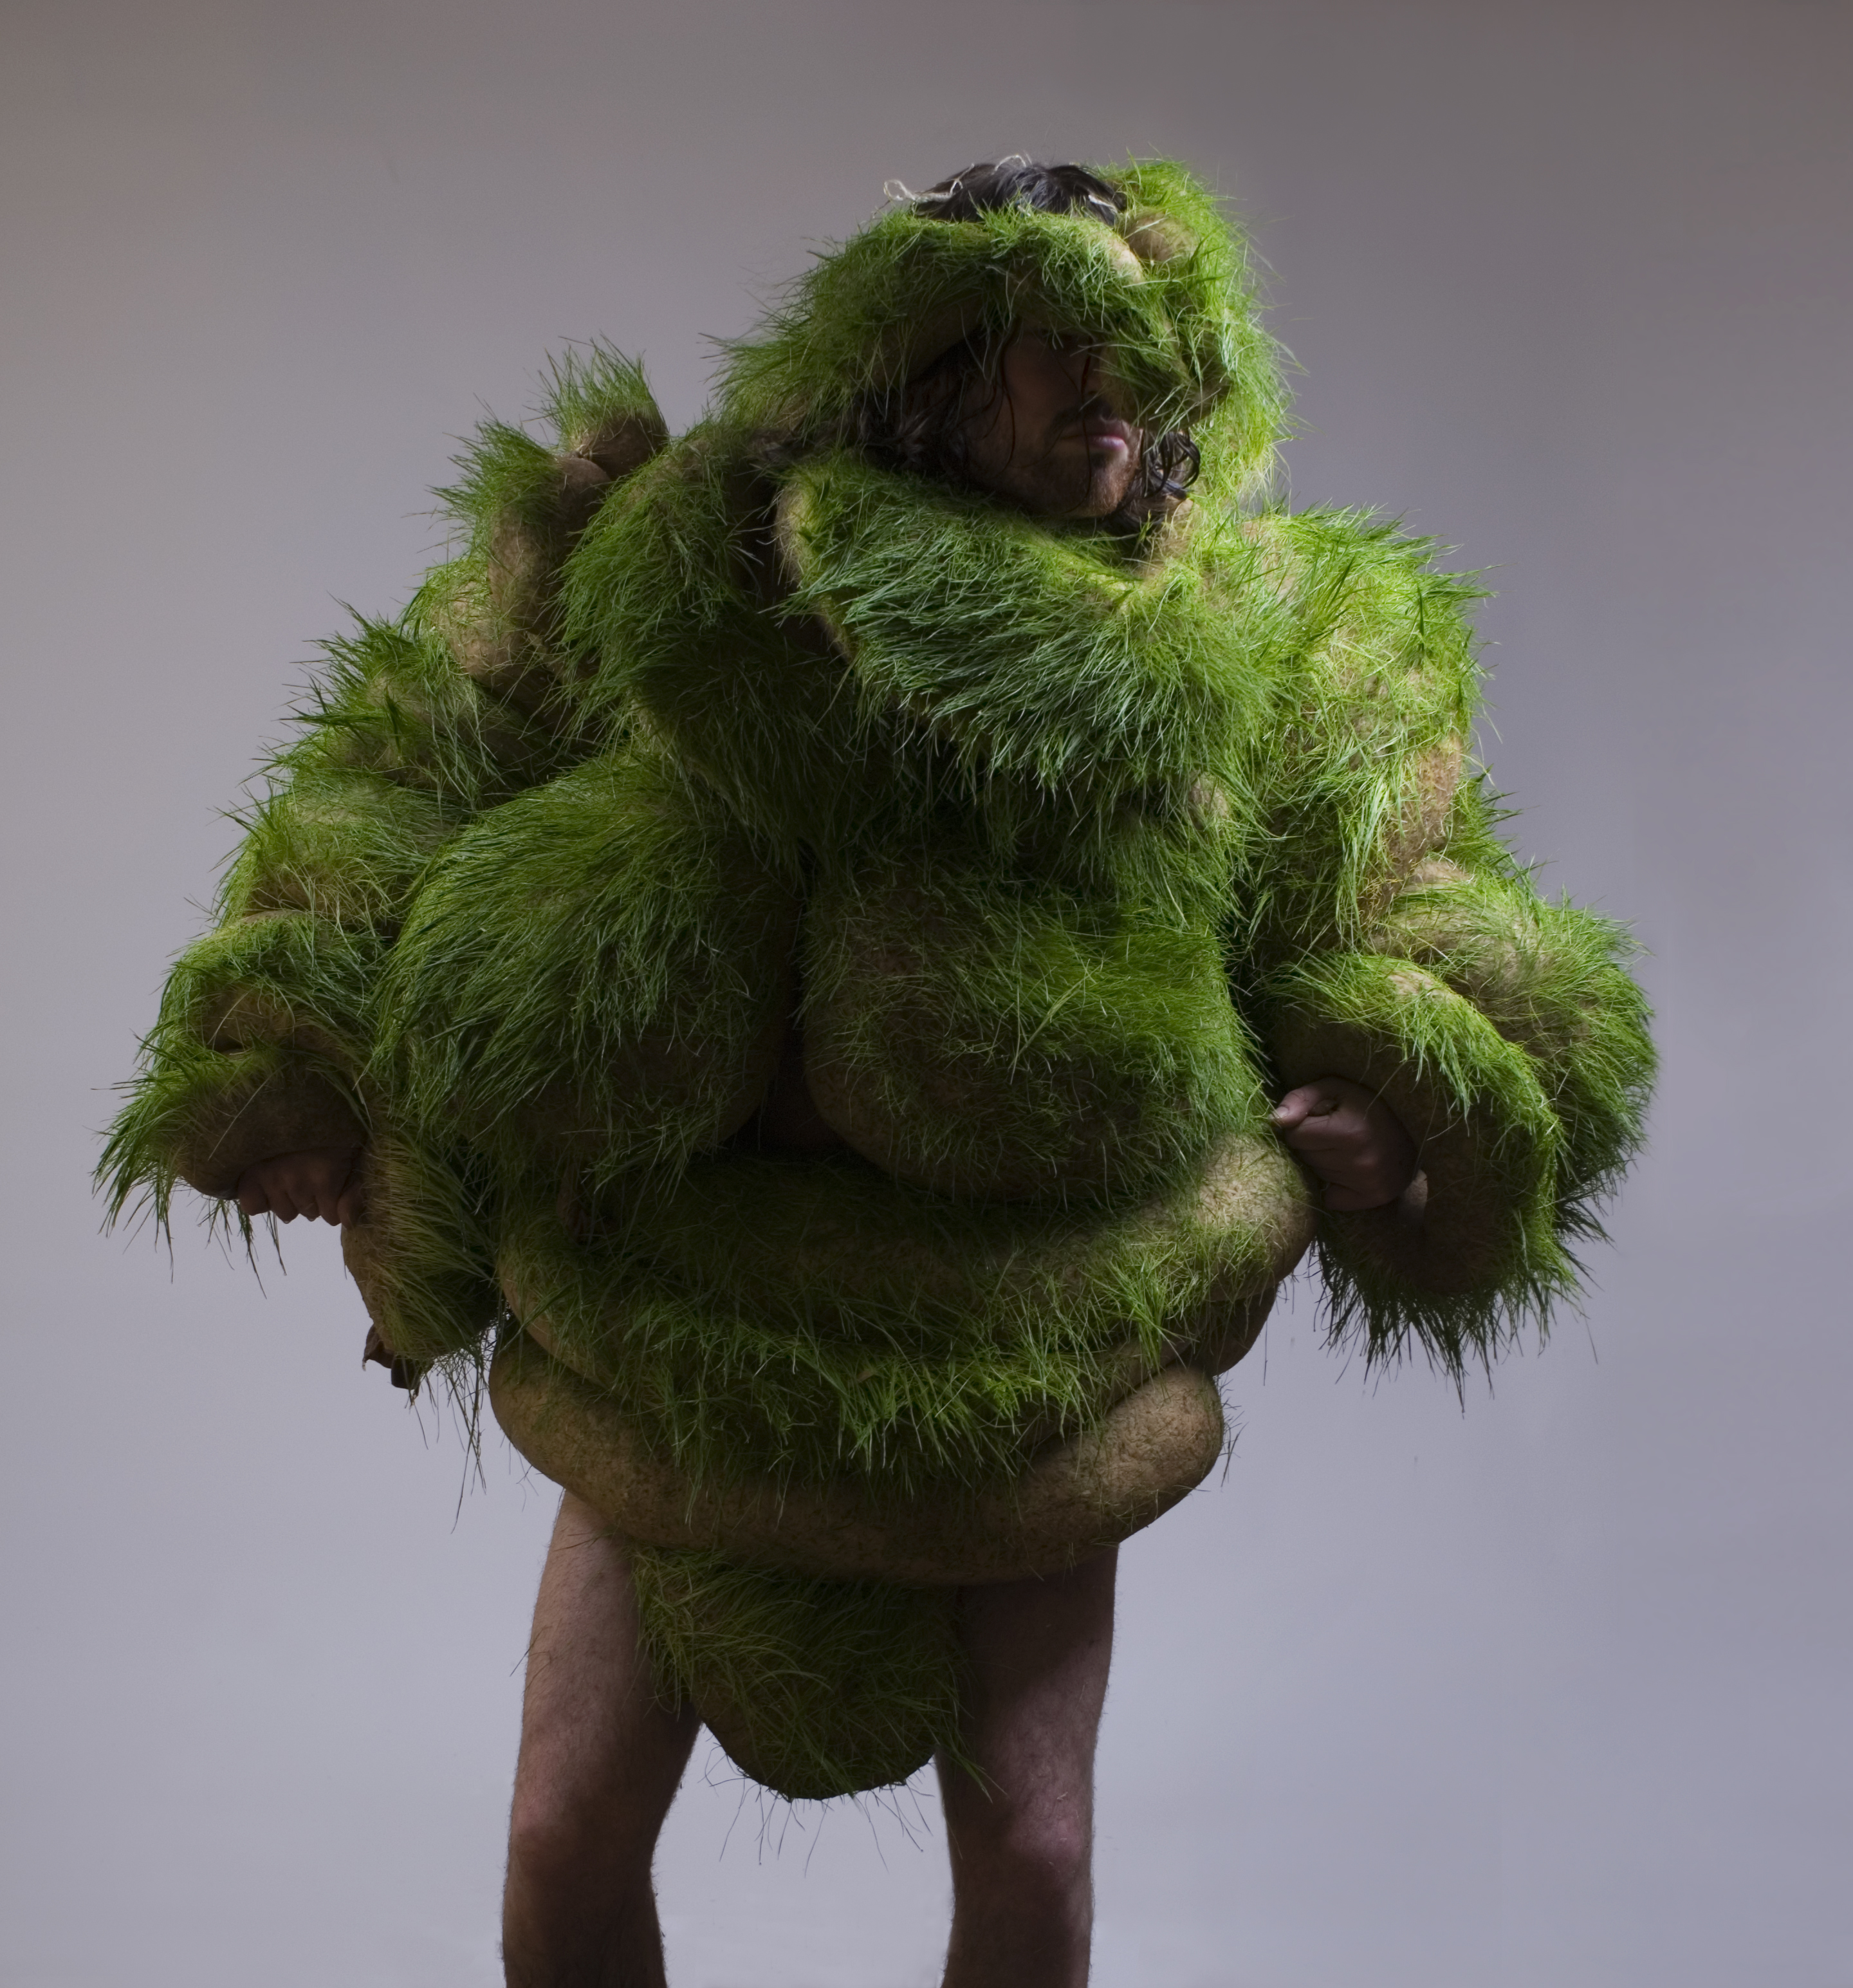 Australian body architect Lucy McRae explores the relationship between the body and technology using synthetic and organic materials. This project, Germination Day 8, was created from pantyhose, sawdust and grass seed.